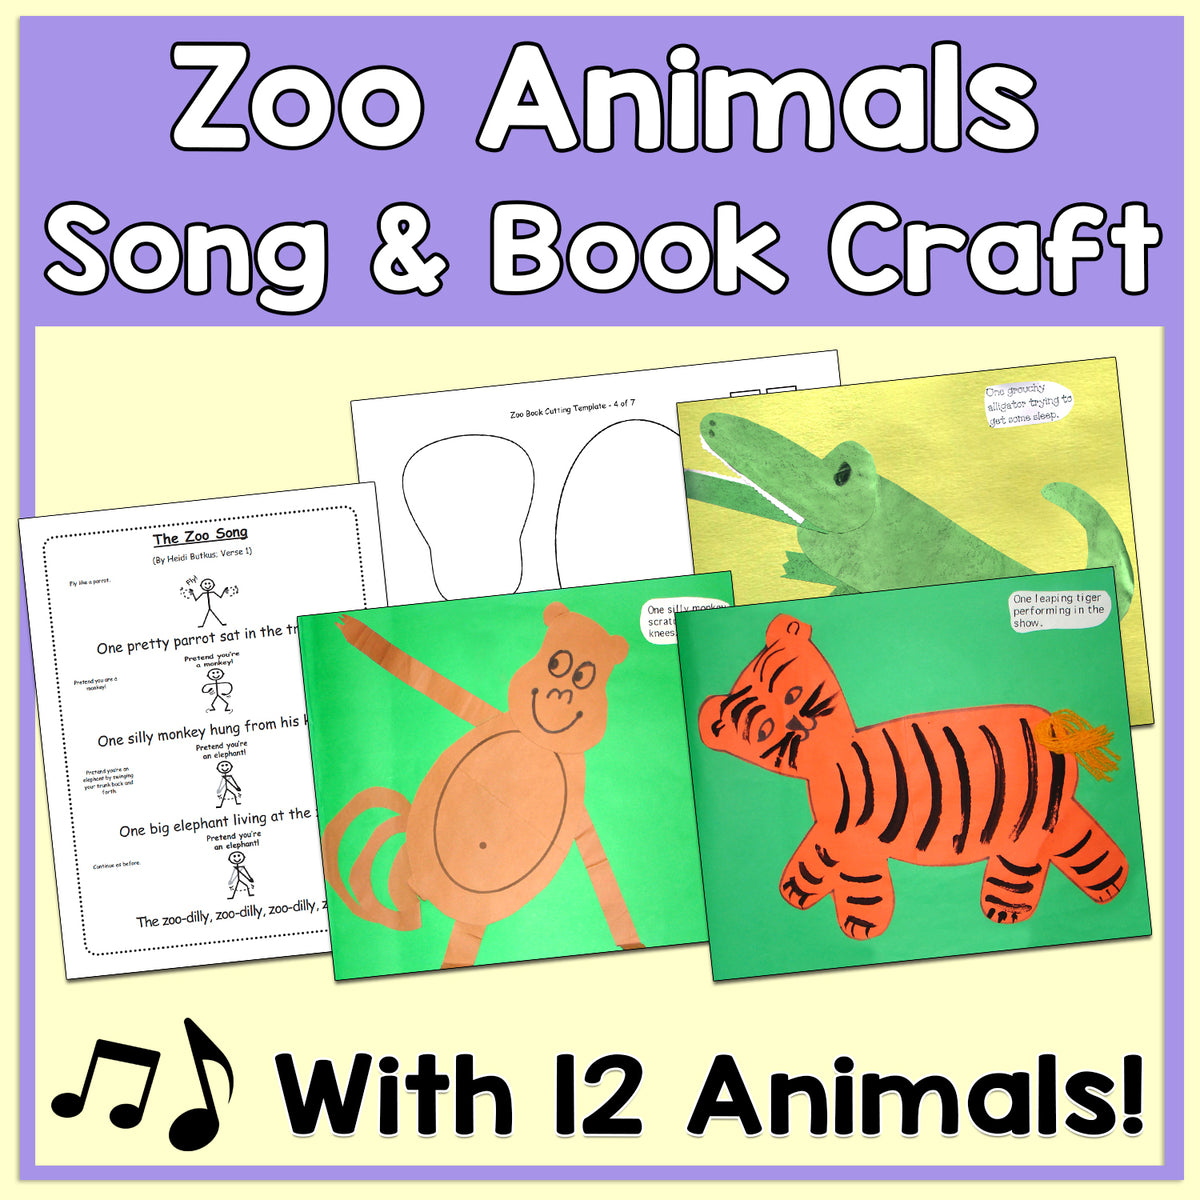 The Zoo Song & Book Craft